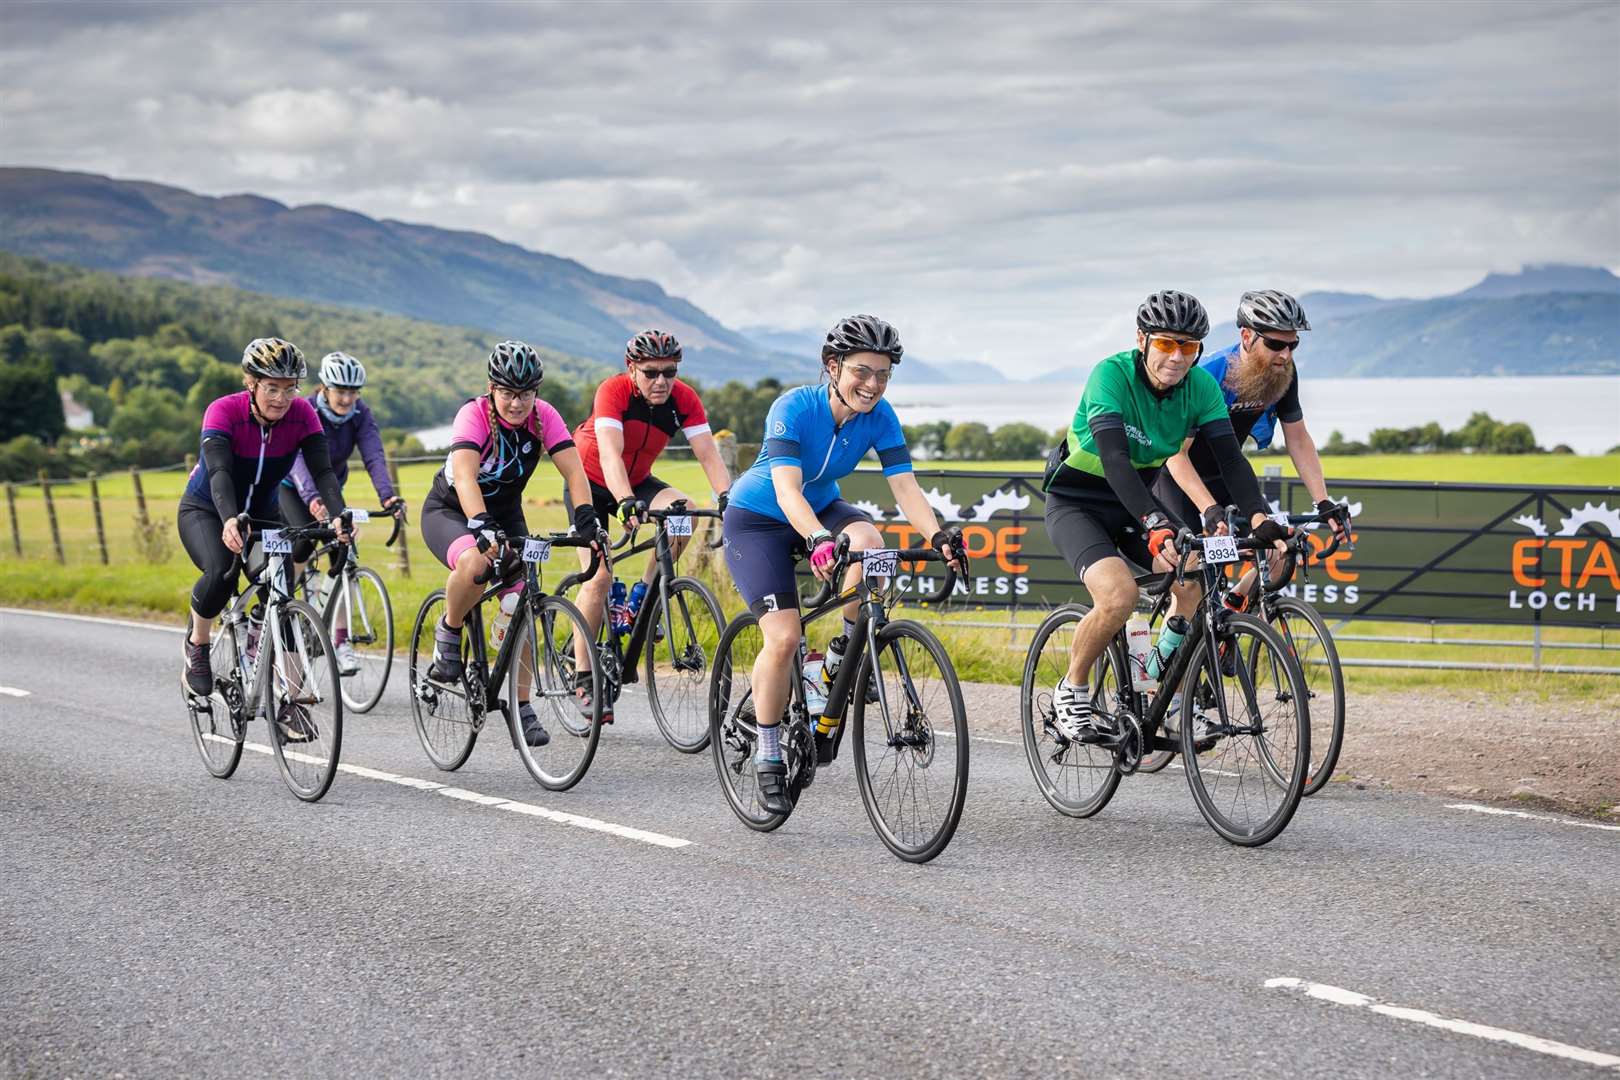 Riders in the Etape Loch Ness make their way up from Dores, with Loch Ness in the background.